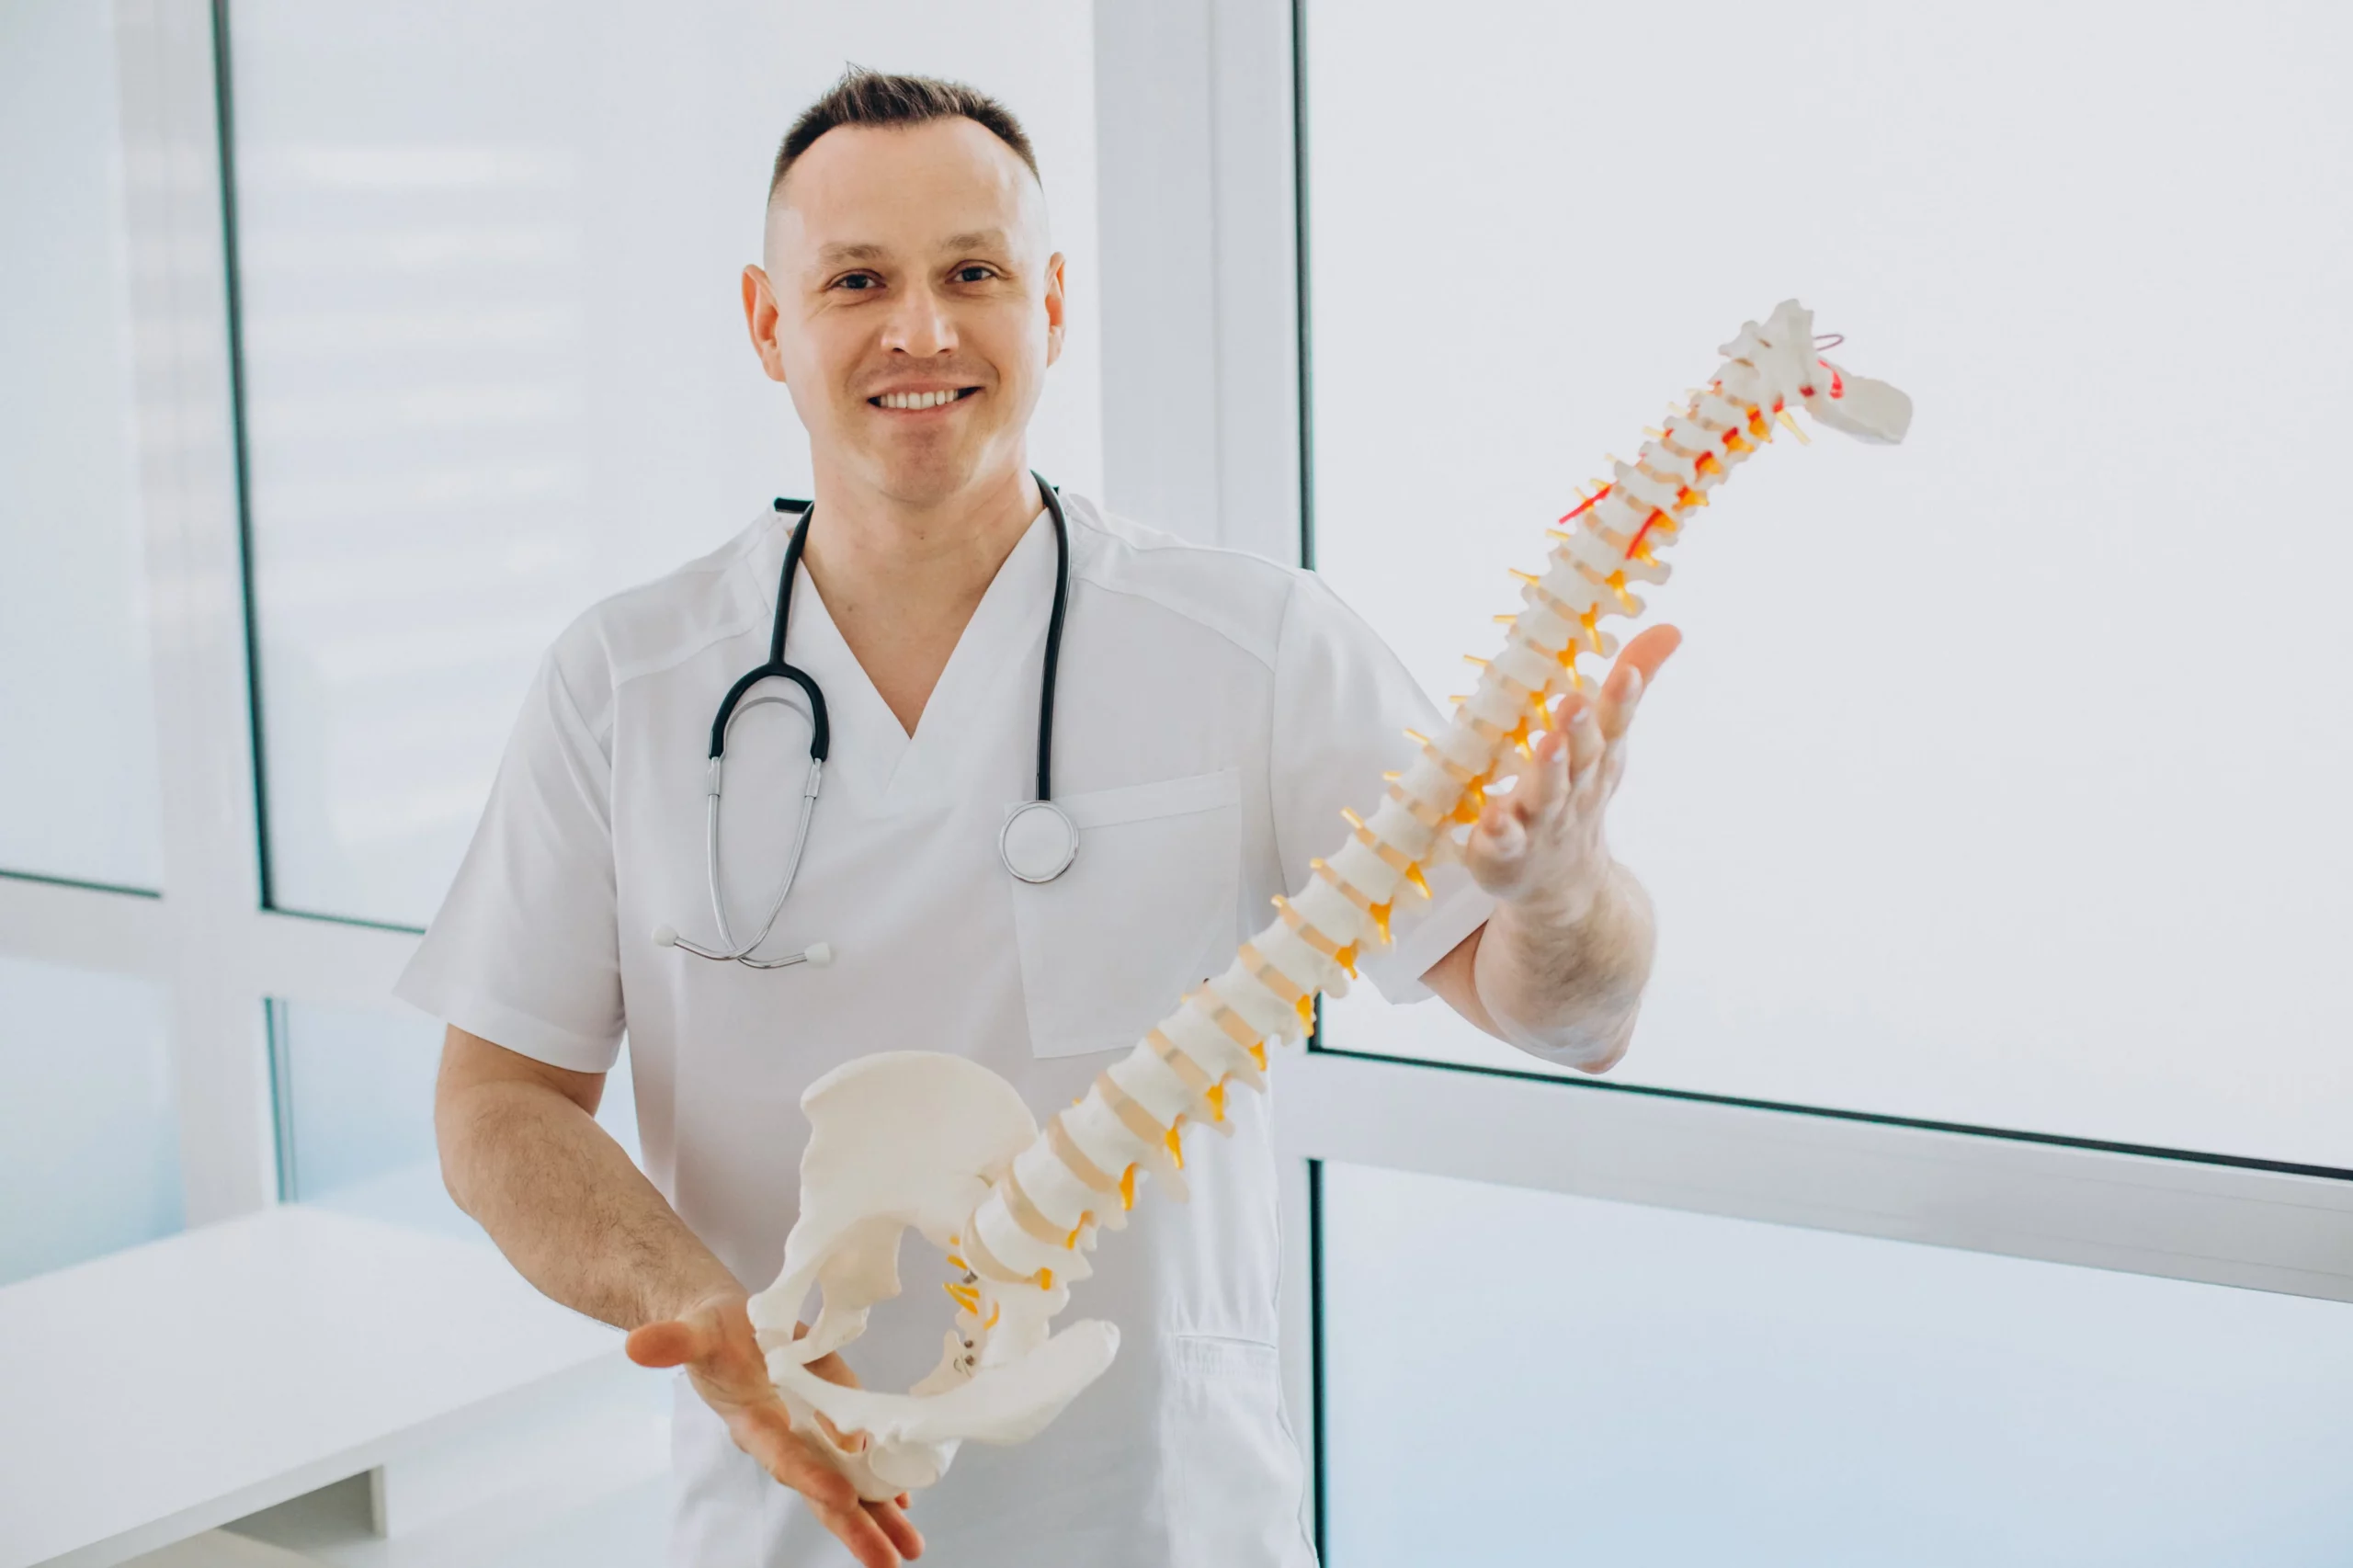 How To Do Chiropractic Adjustments: The Fundamentals